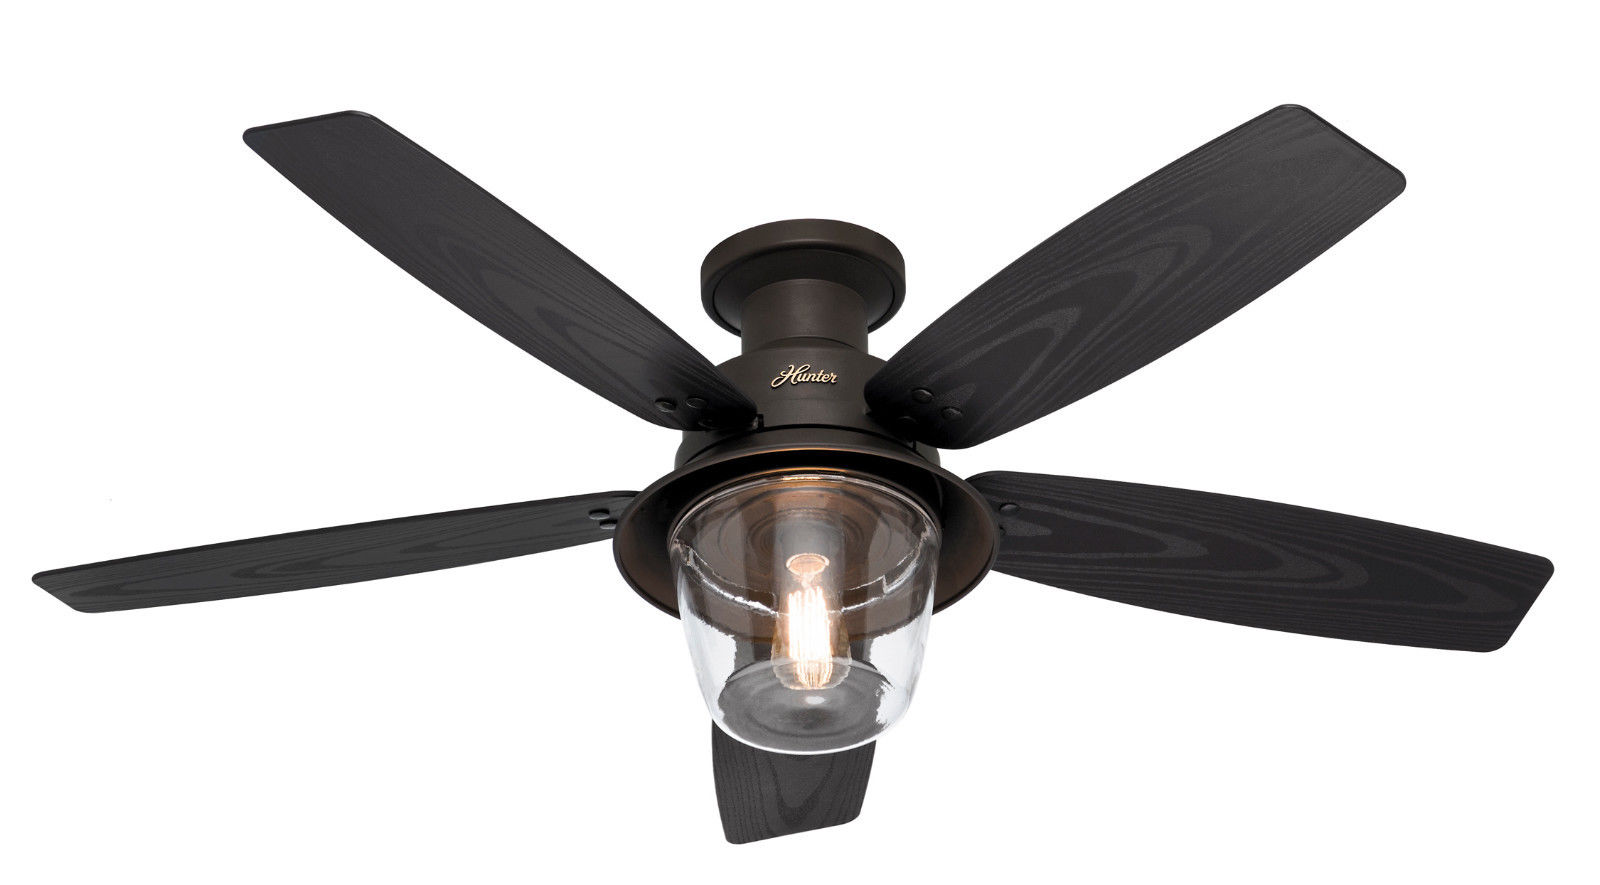 ... the house mood - 20 best Rustic ceiling fans | Warisan Lighting